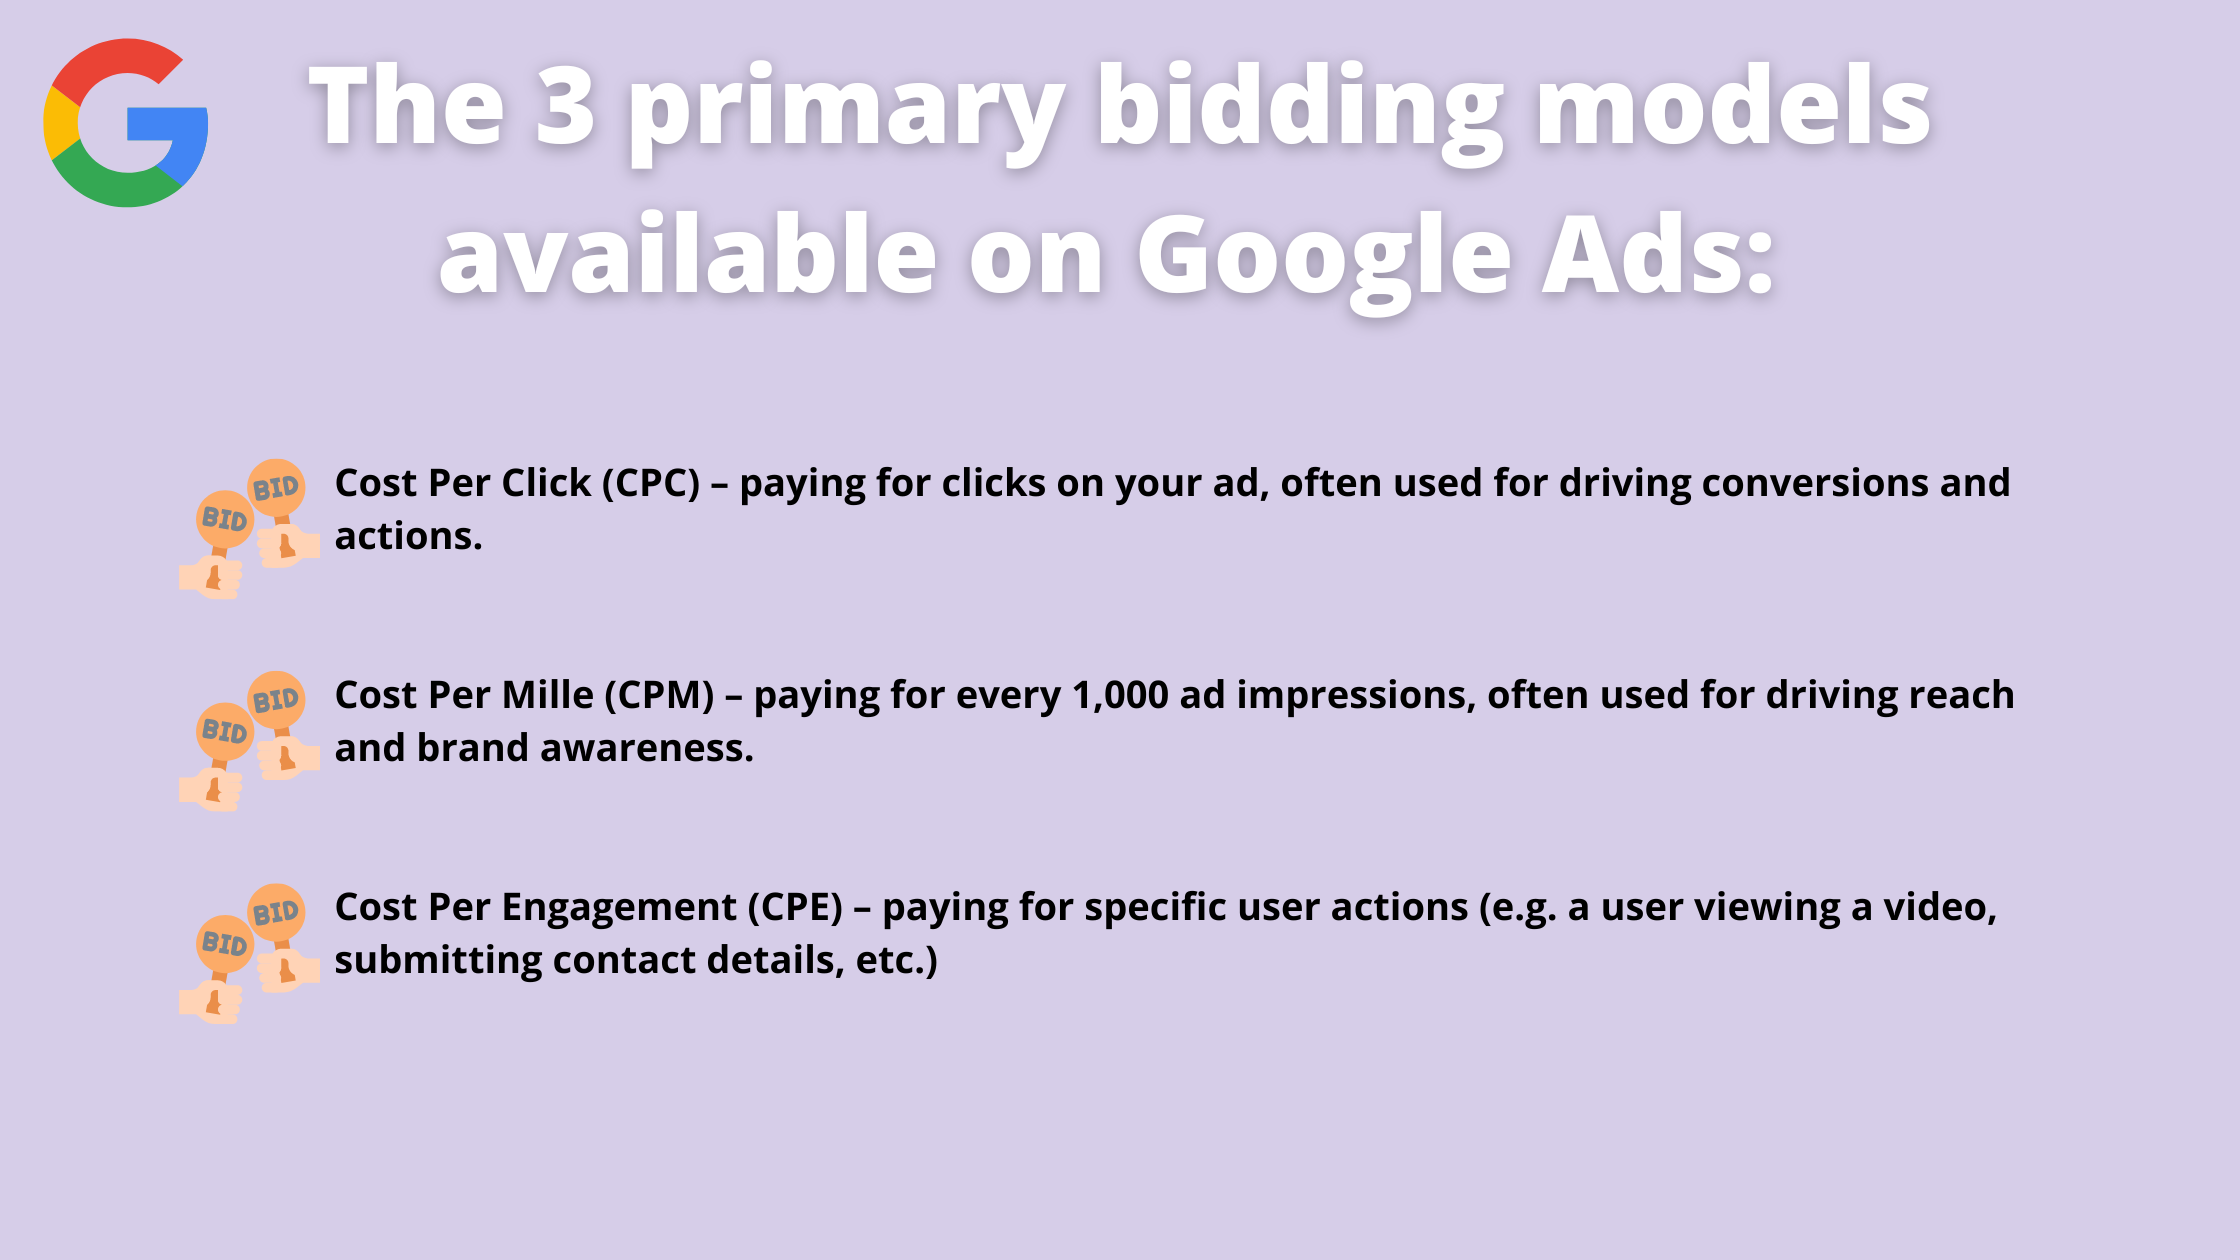 The 3 primary bidding models on Google Ads